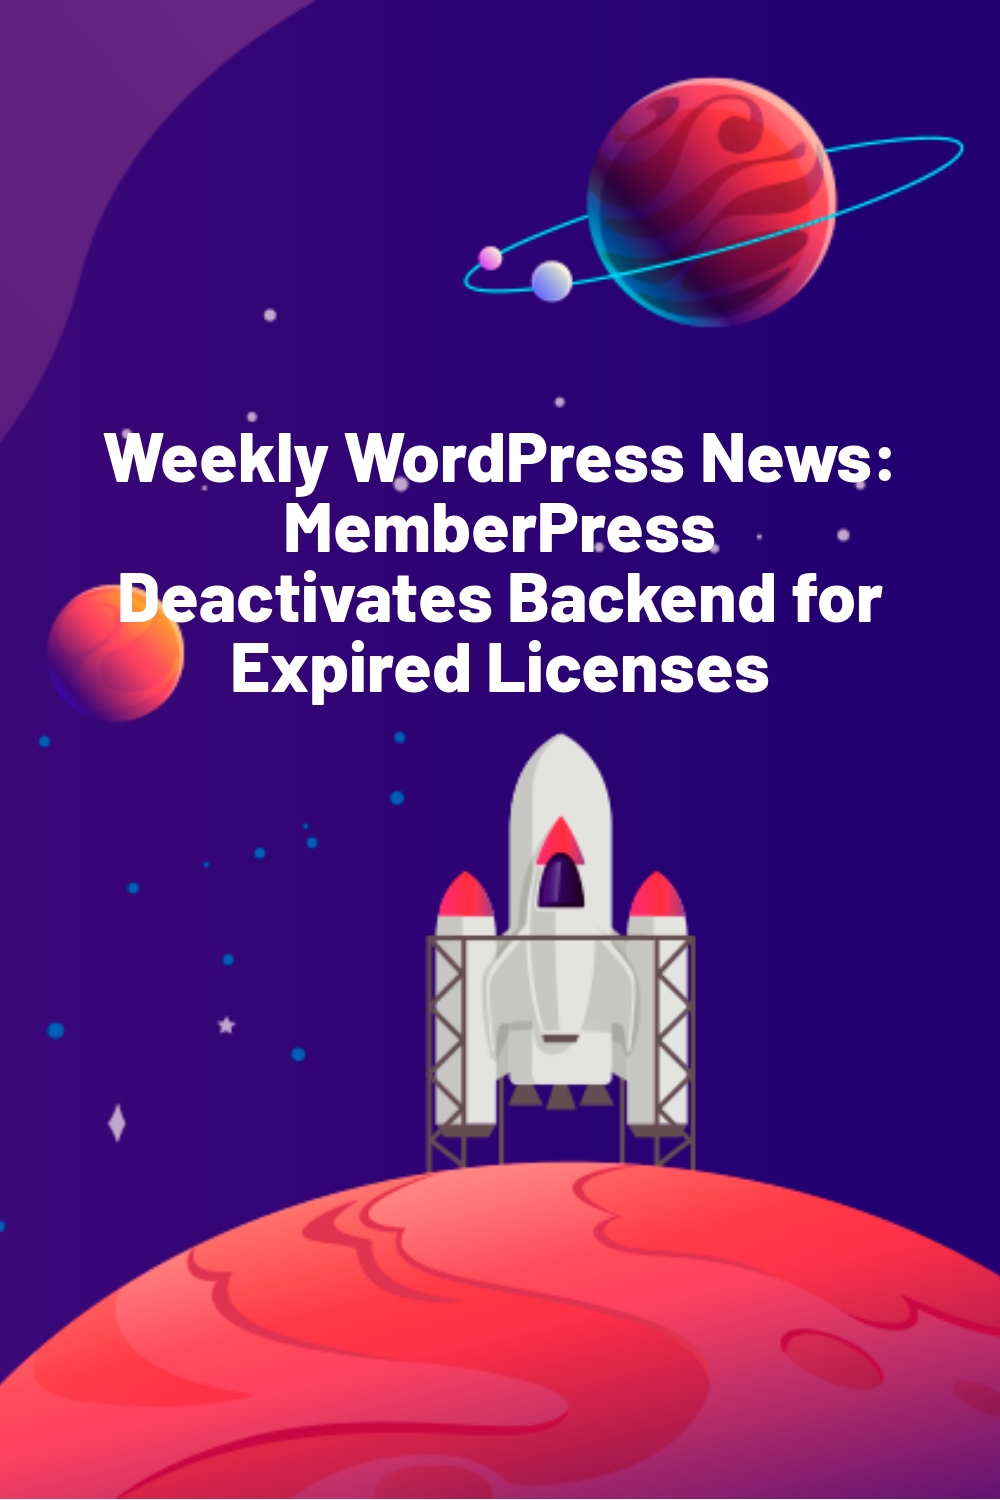 Weekly WordPress News: MemberPress Deactivates Backend for Expired Licenses